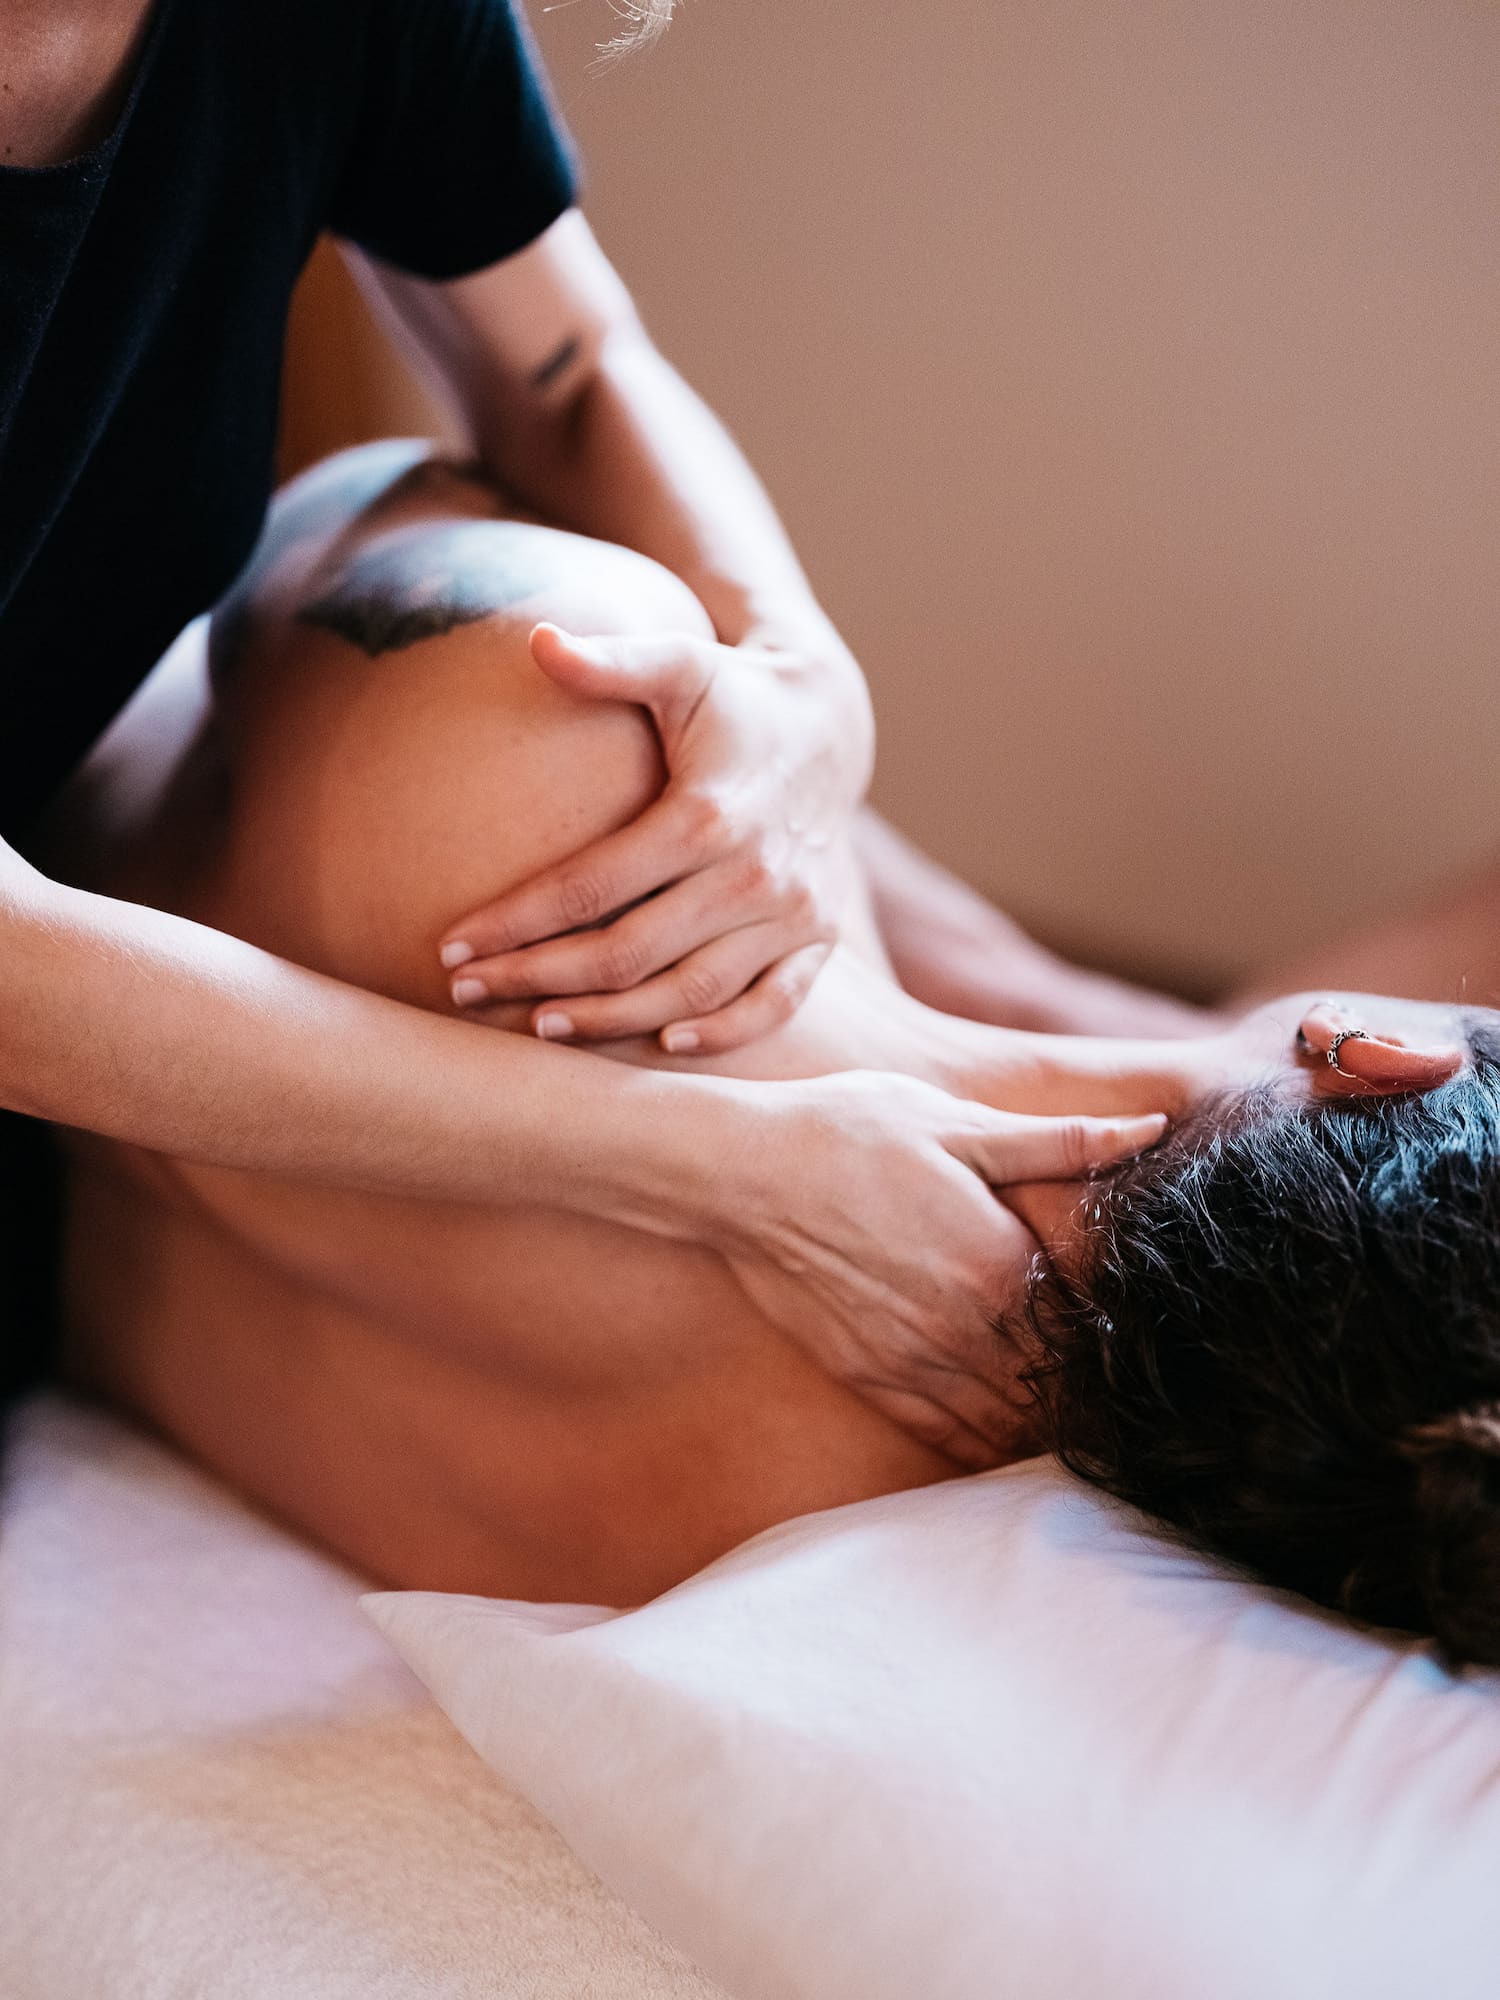 Hands on the neck and shoulder of a person getting a massage.